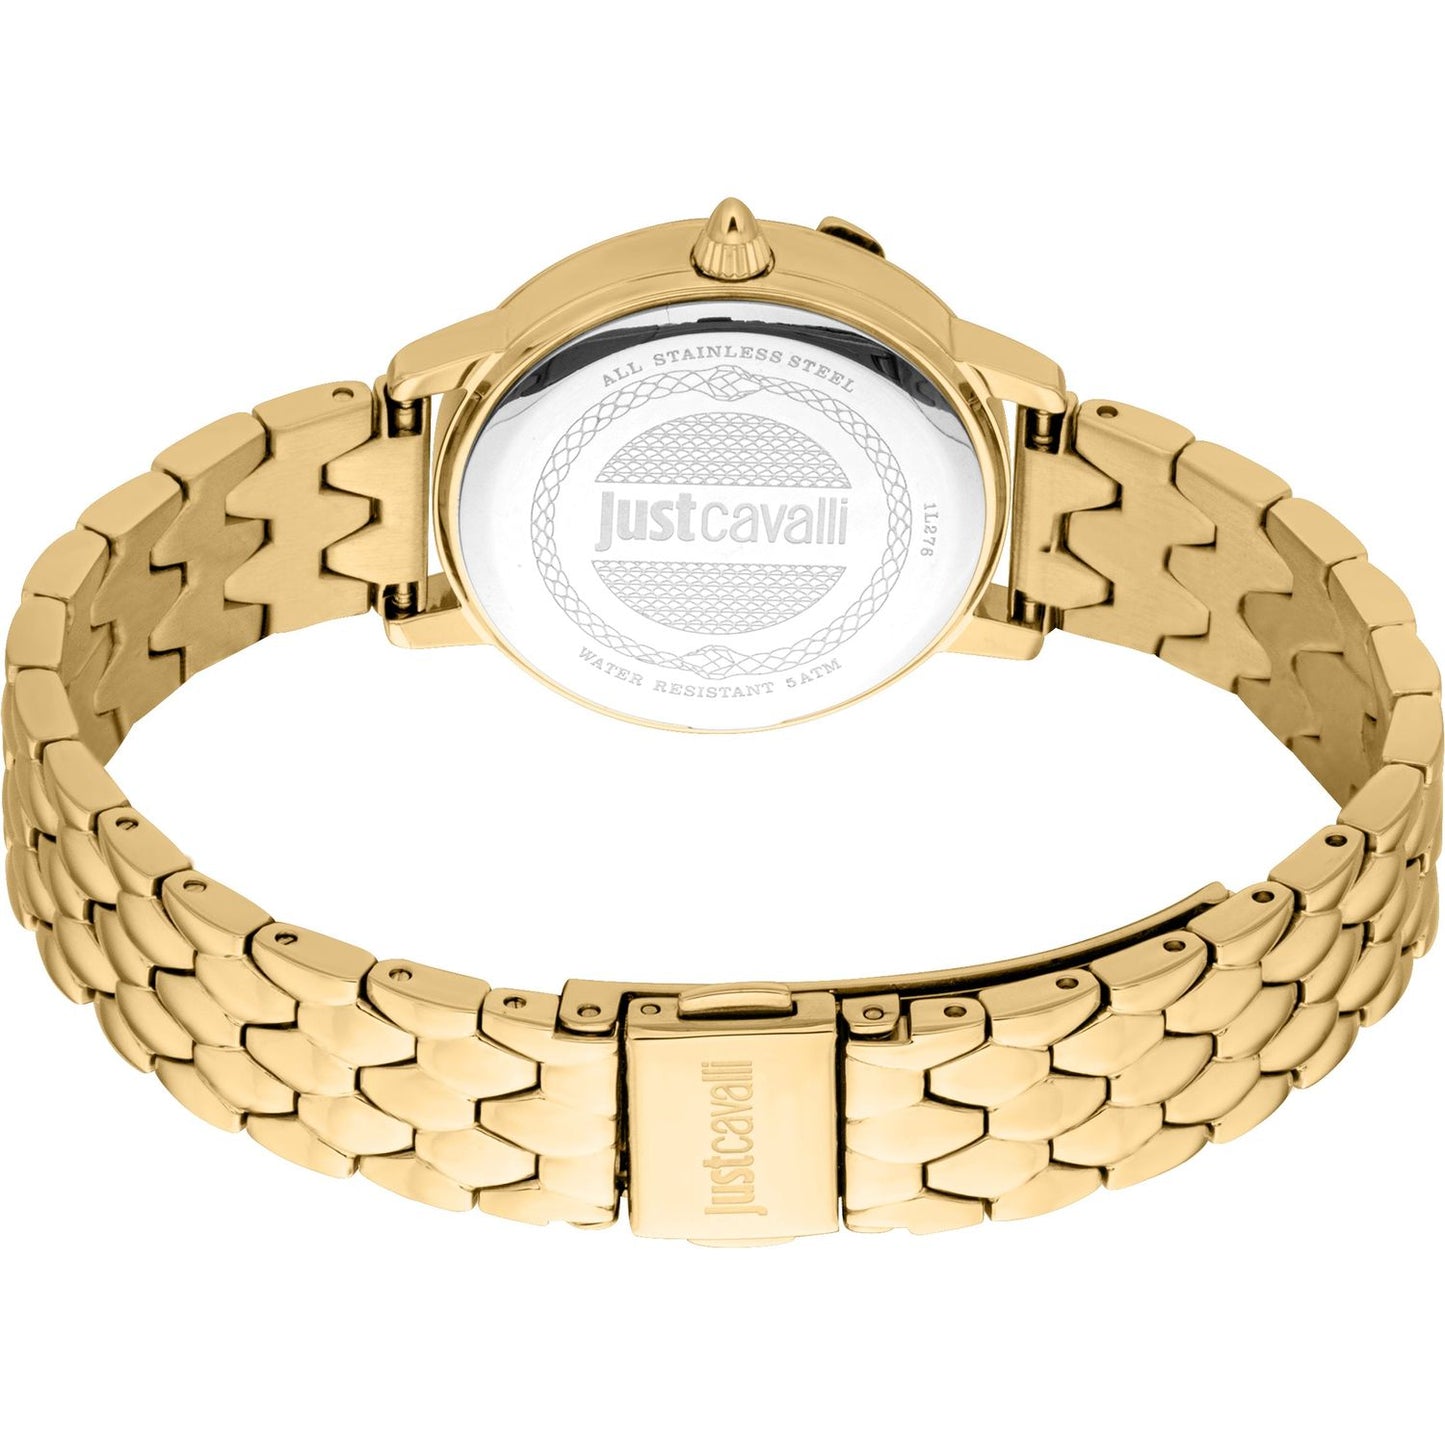 JUST CAVALLI TIME JUST CAVALLI TIME Mod. FIDENZA 2023-24 COLLECTION WATCHES just-cavalli-time-mod-fidenza-2023-24-collection-3